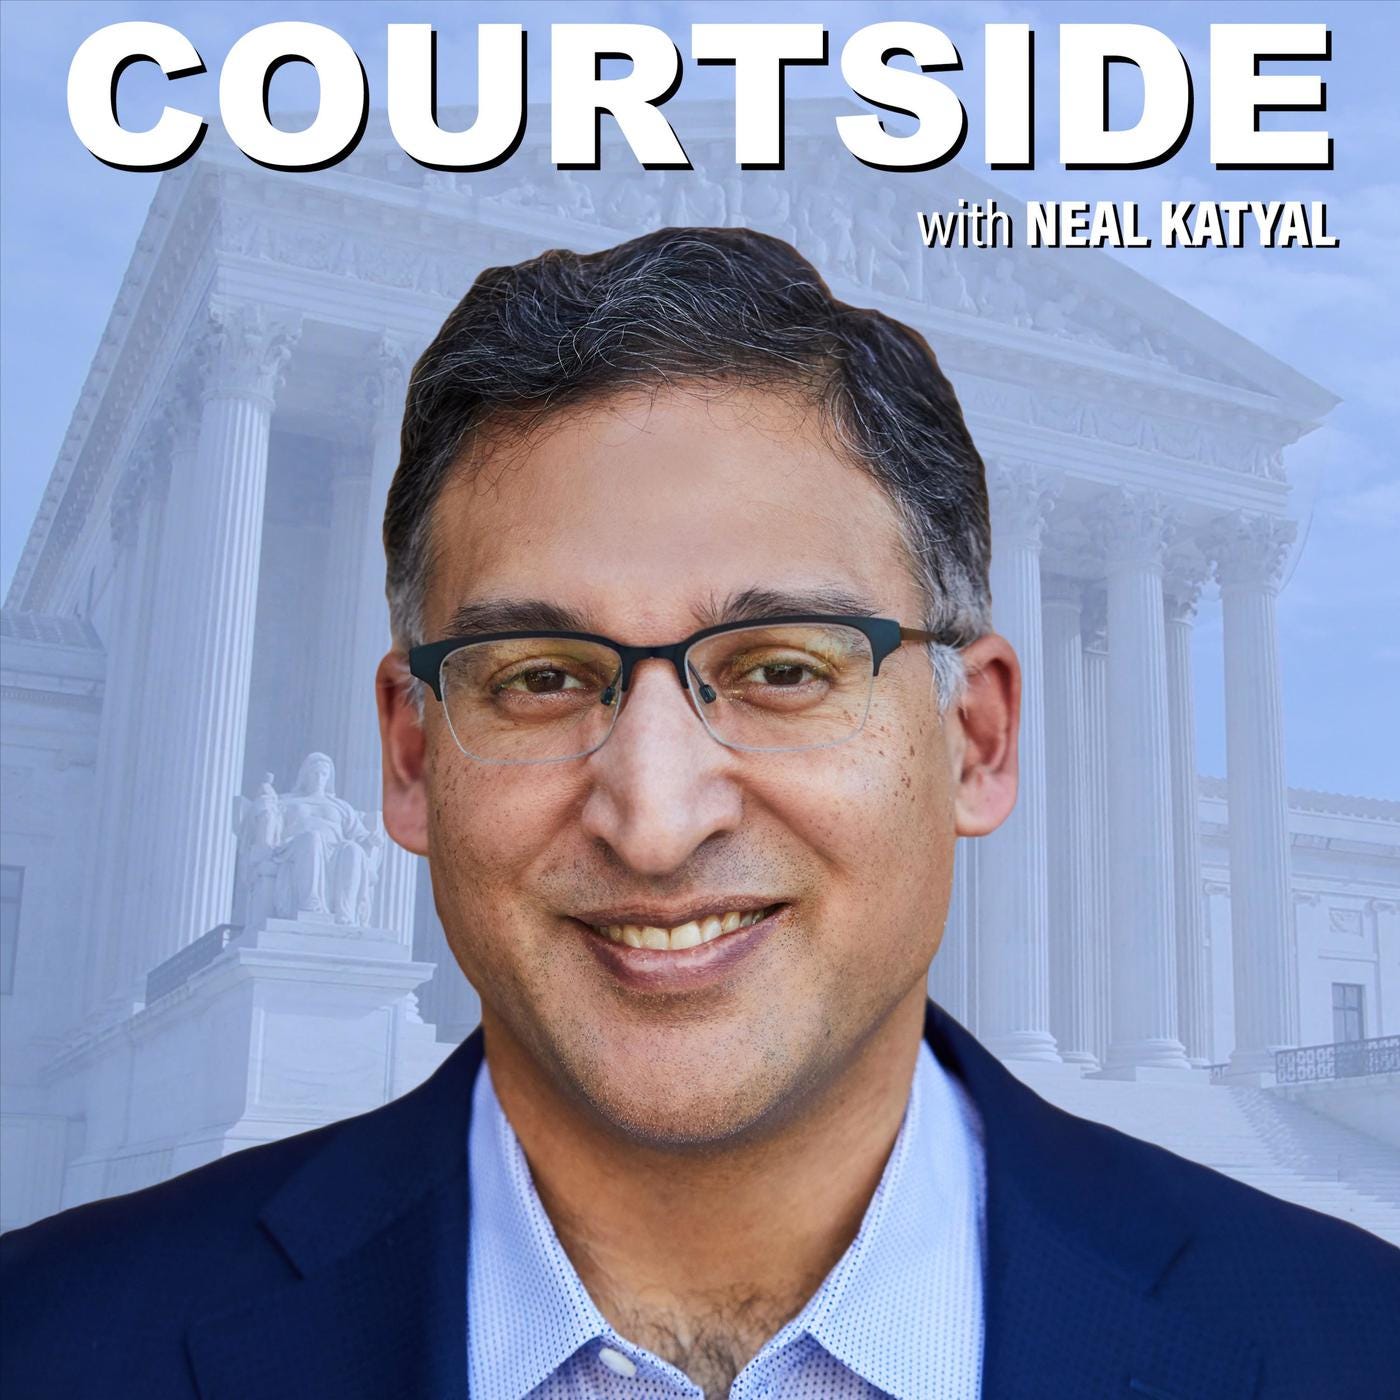 Portrait of a man with dark graying hair and glasses in a suit jacket superimposed over an image of the Supreme Court